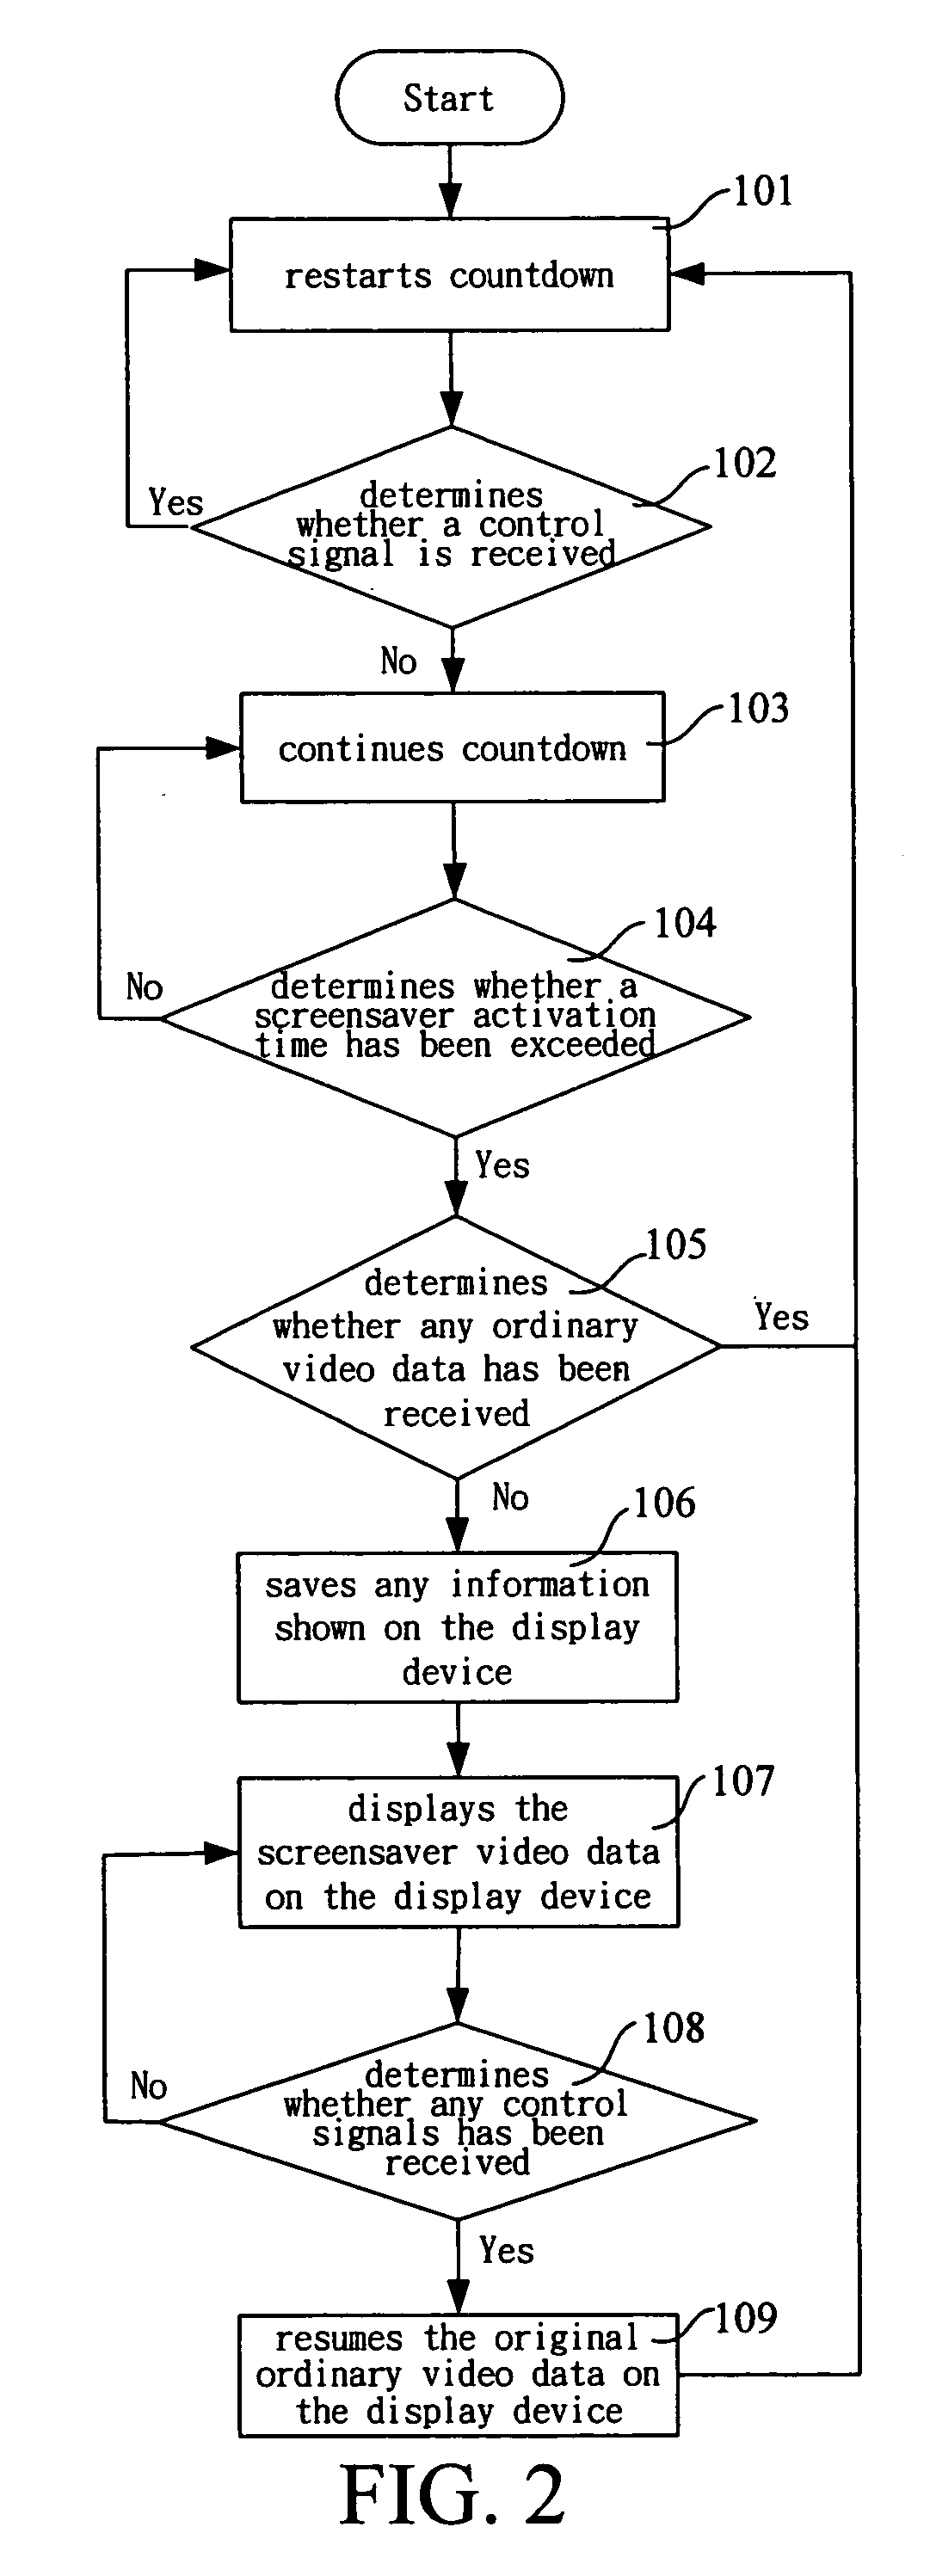 Method for centrally distributing screensaver video to protect display devices